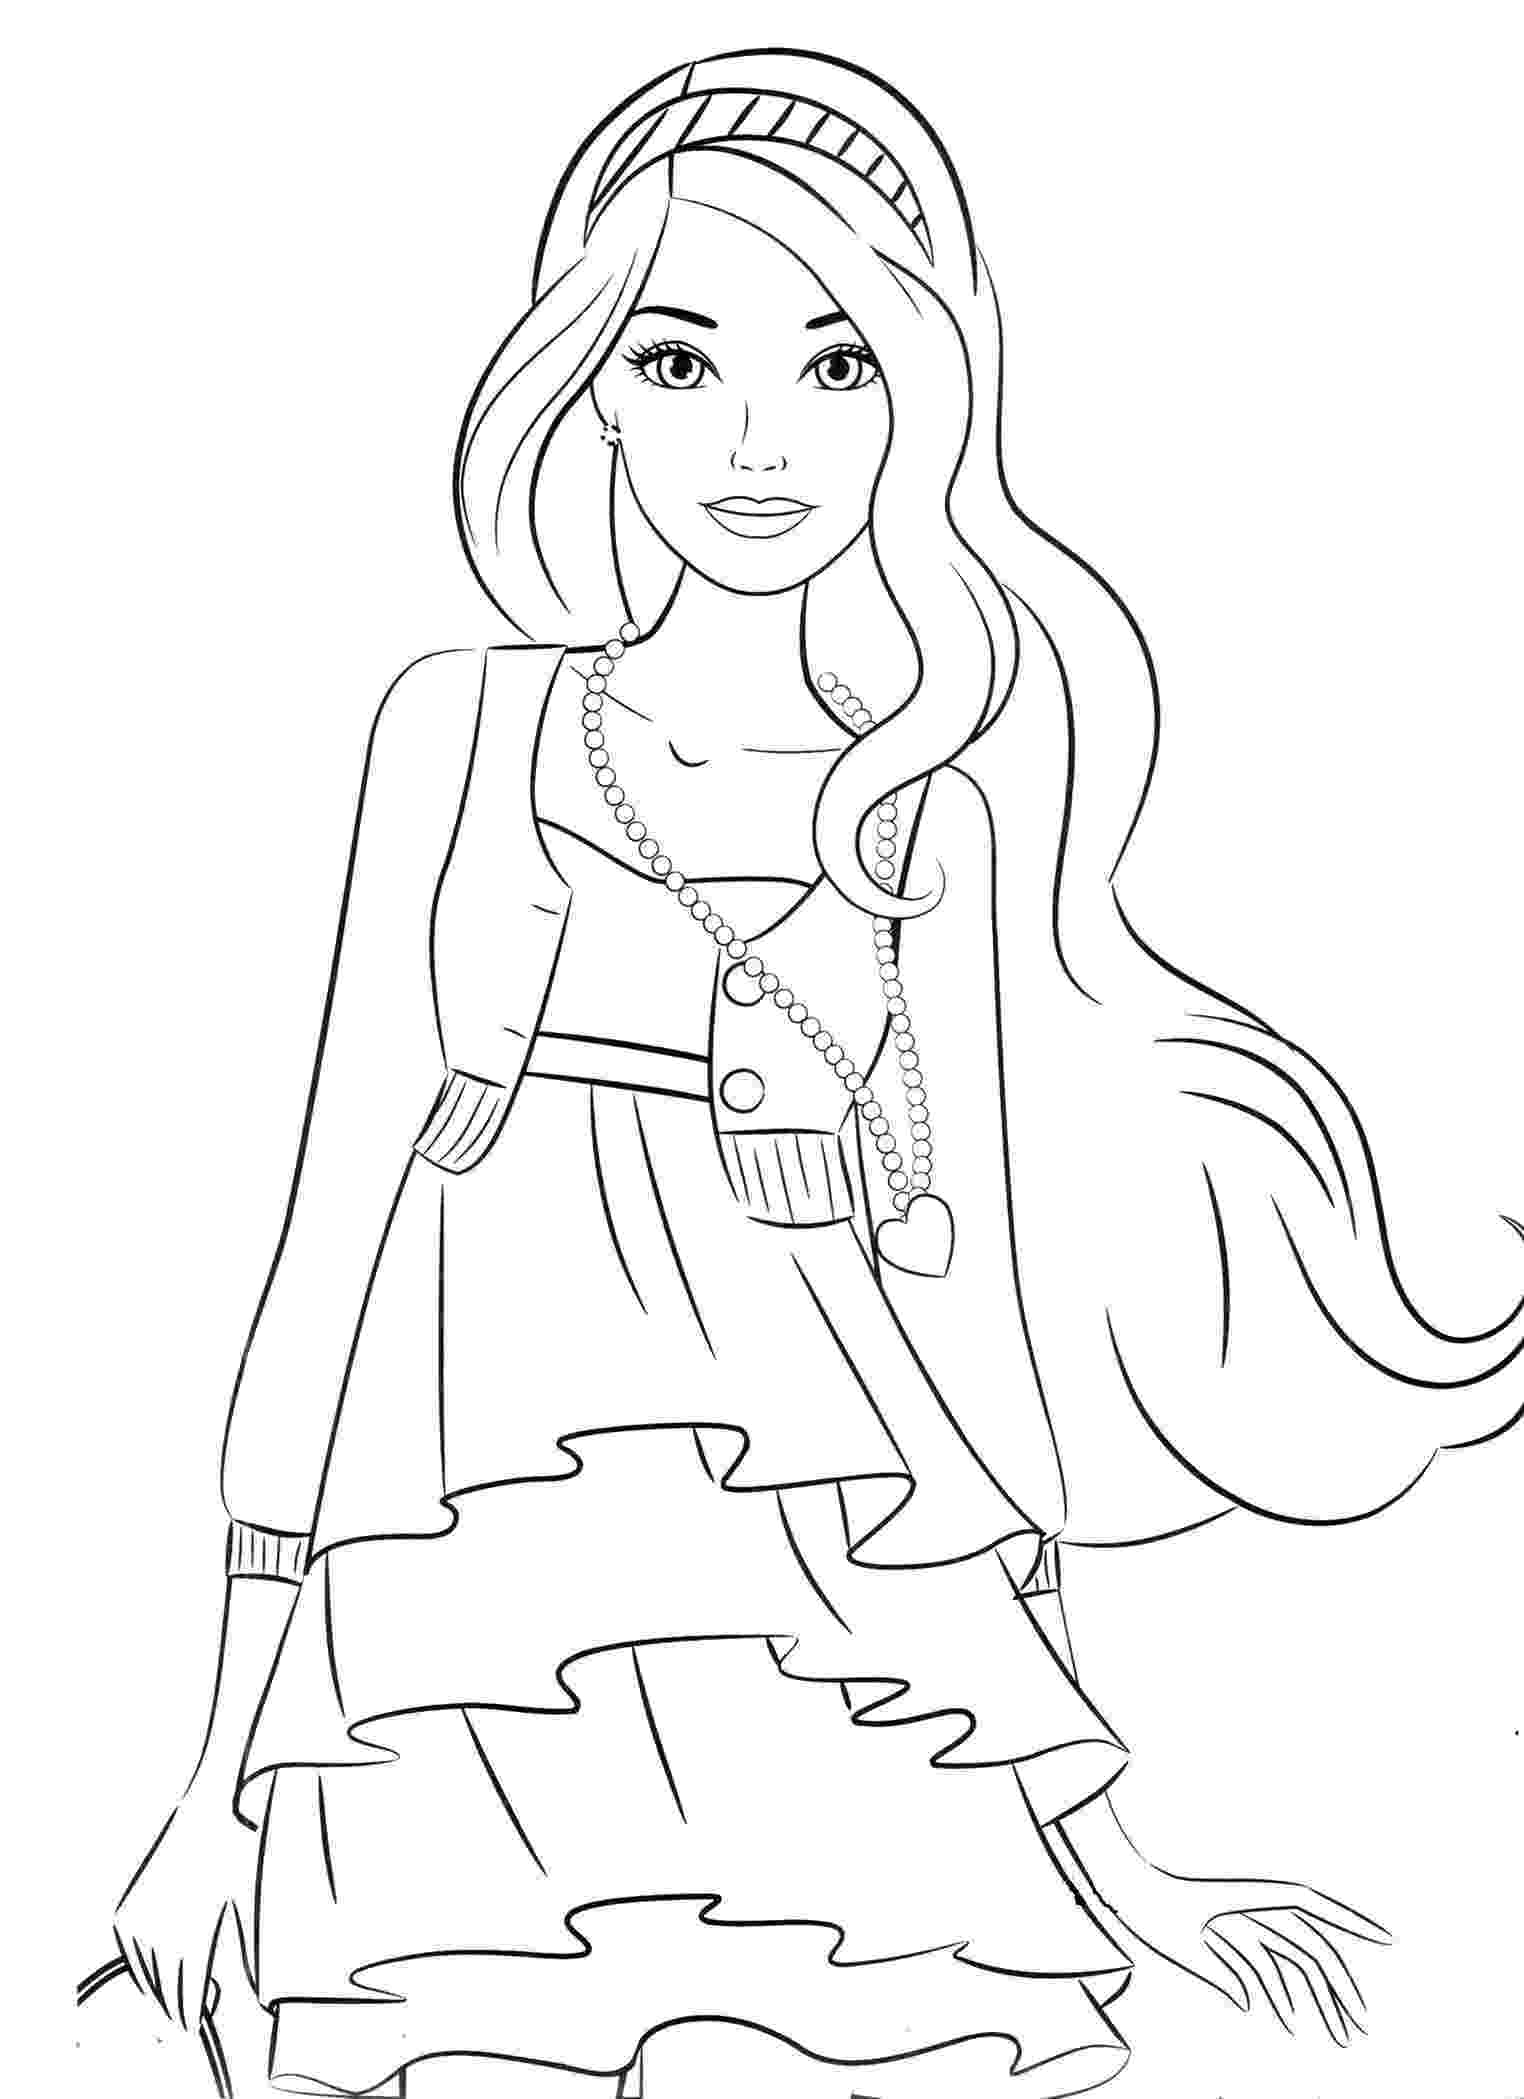 free colouring pages for girls mermaid coloring pages to download and print for free girls colouring pages free for 